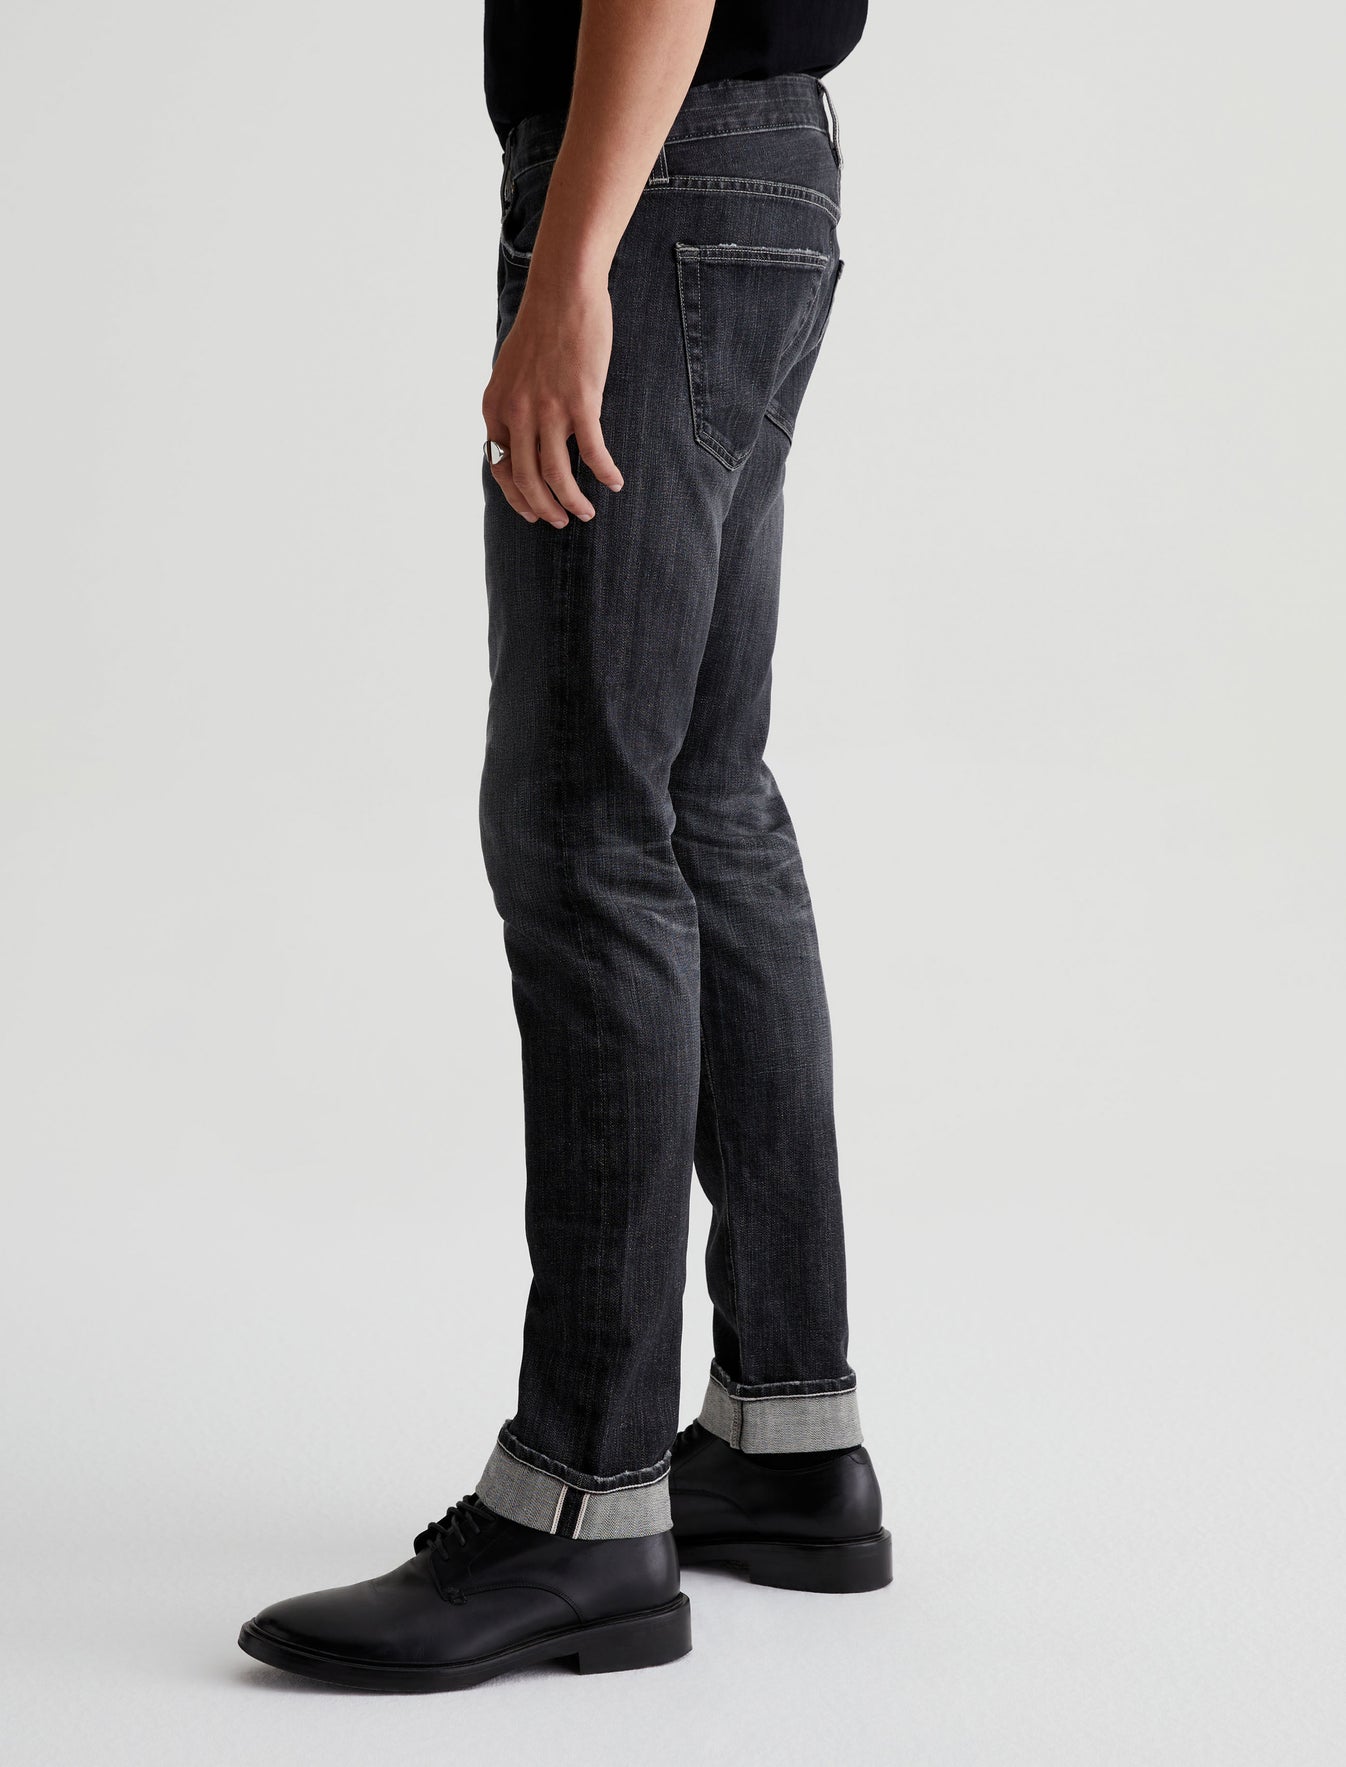 Miyagi Store Years at Tellis AG Jeans Mens Selvage 10 Official